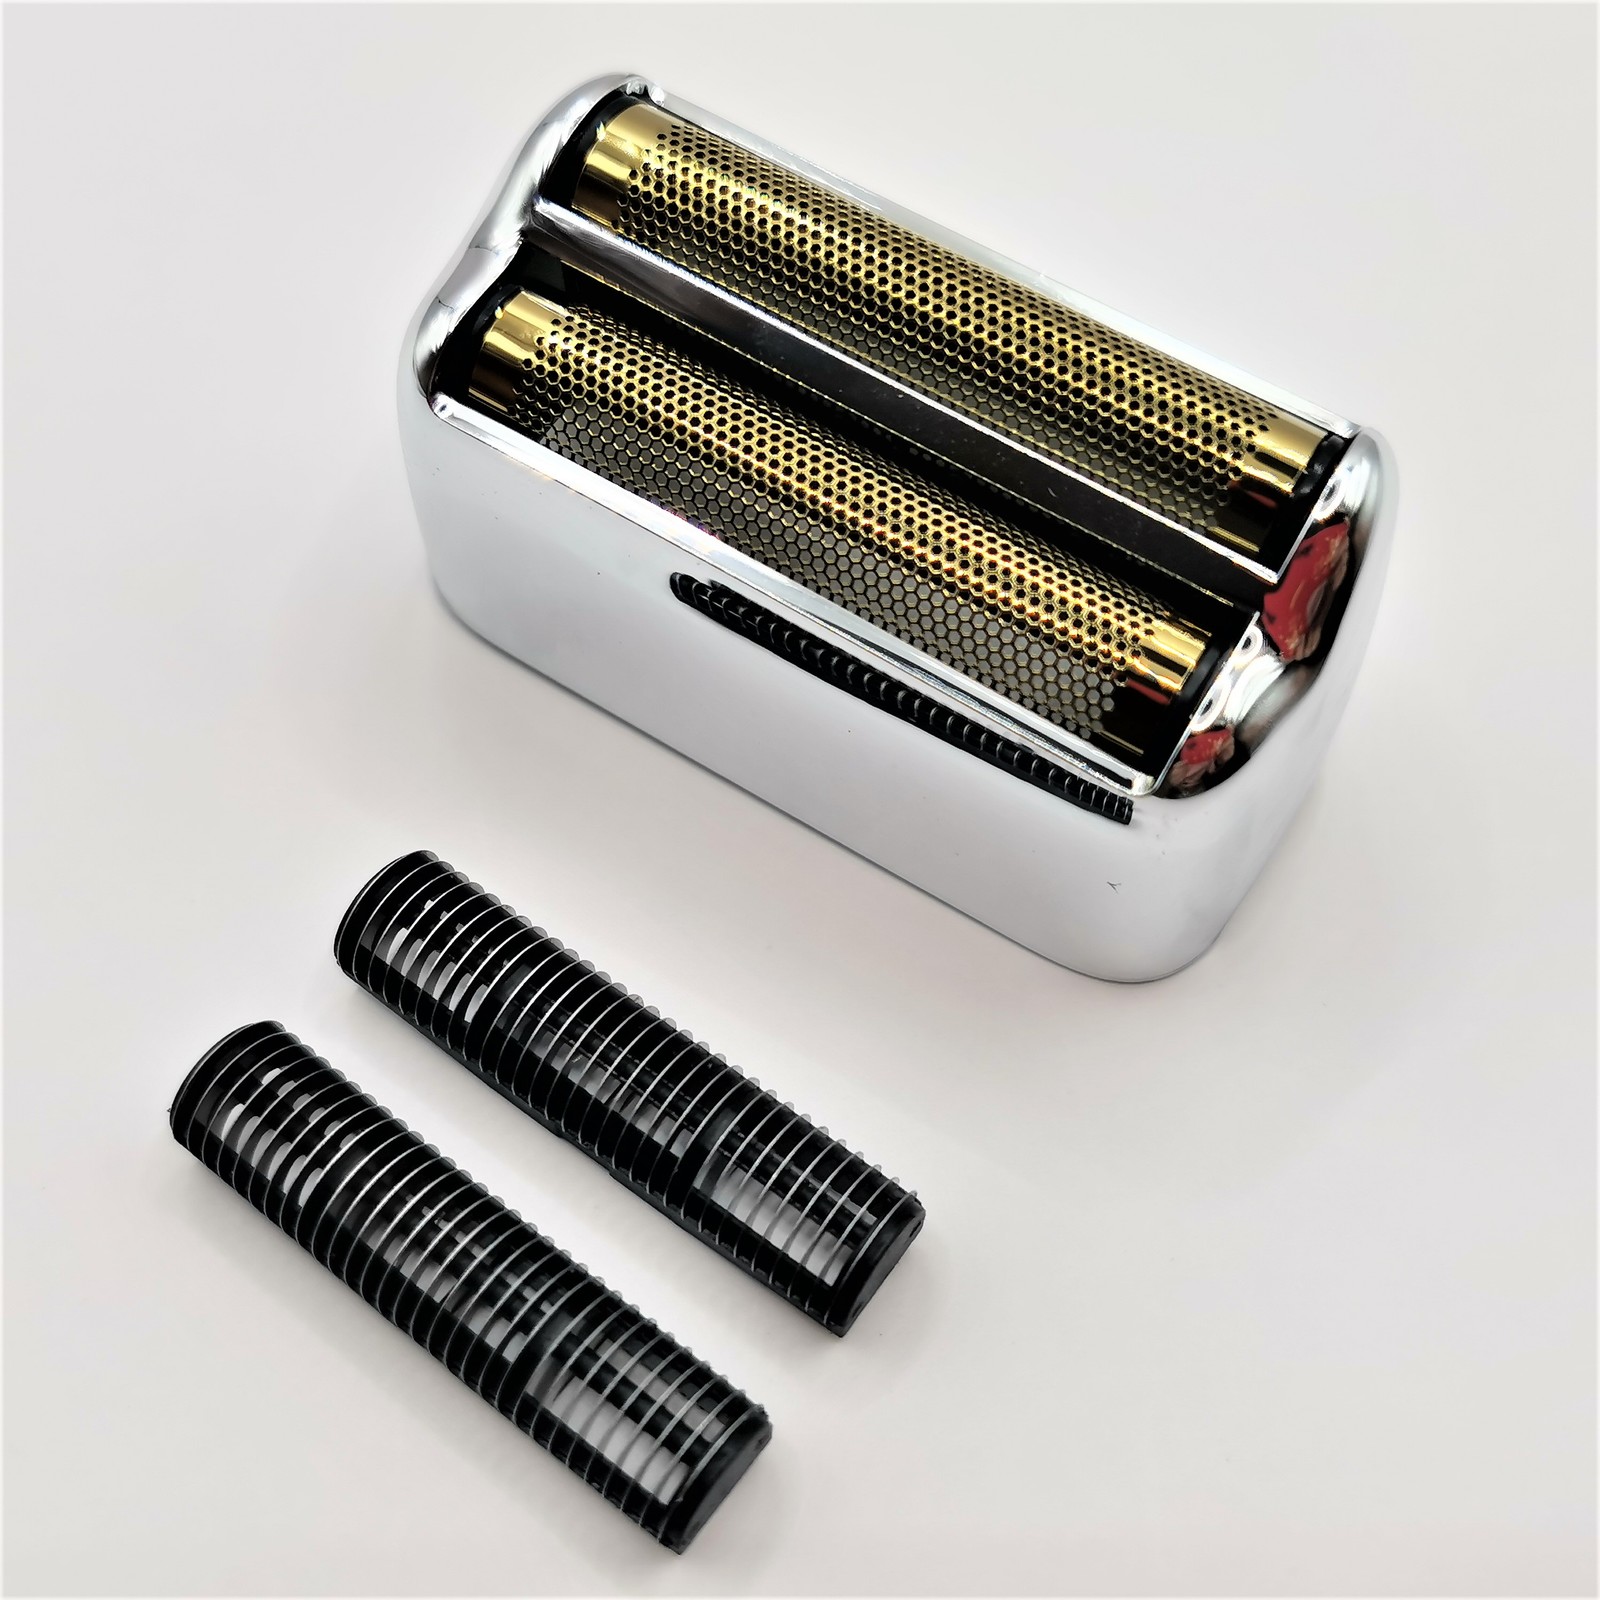 Primary image for For Babyliss Pro Replacement Shaver Foil & Blades For FXFS2G FXRF2 Razor Silver